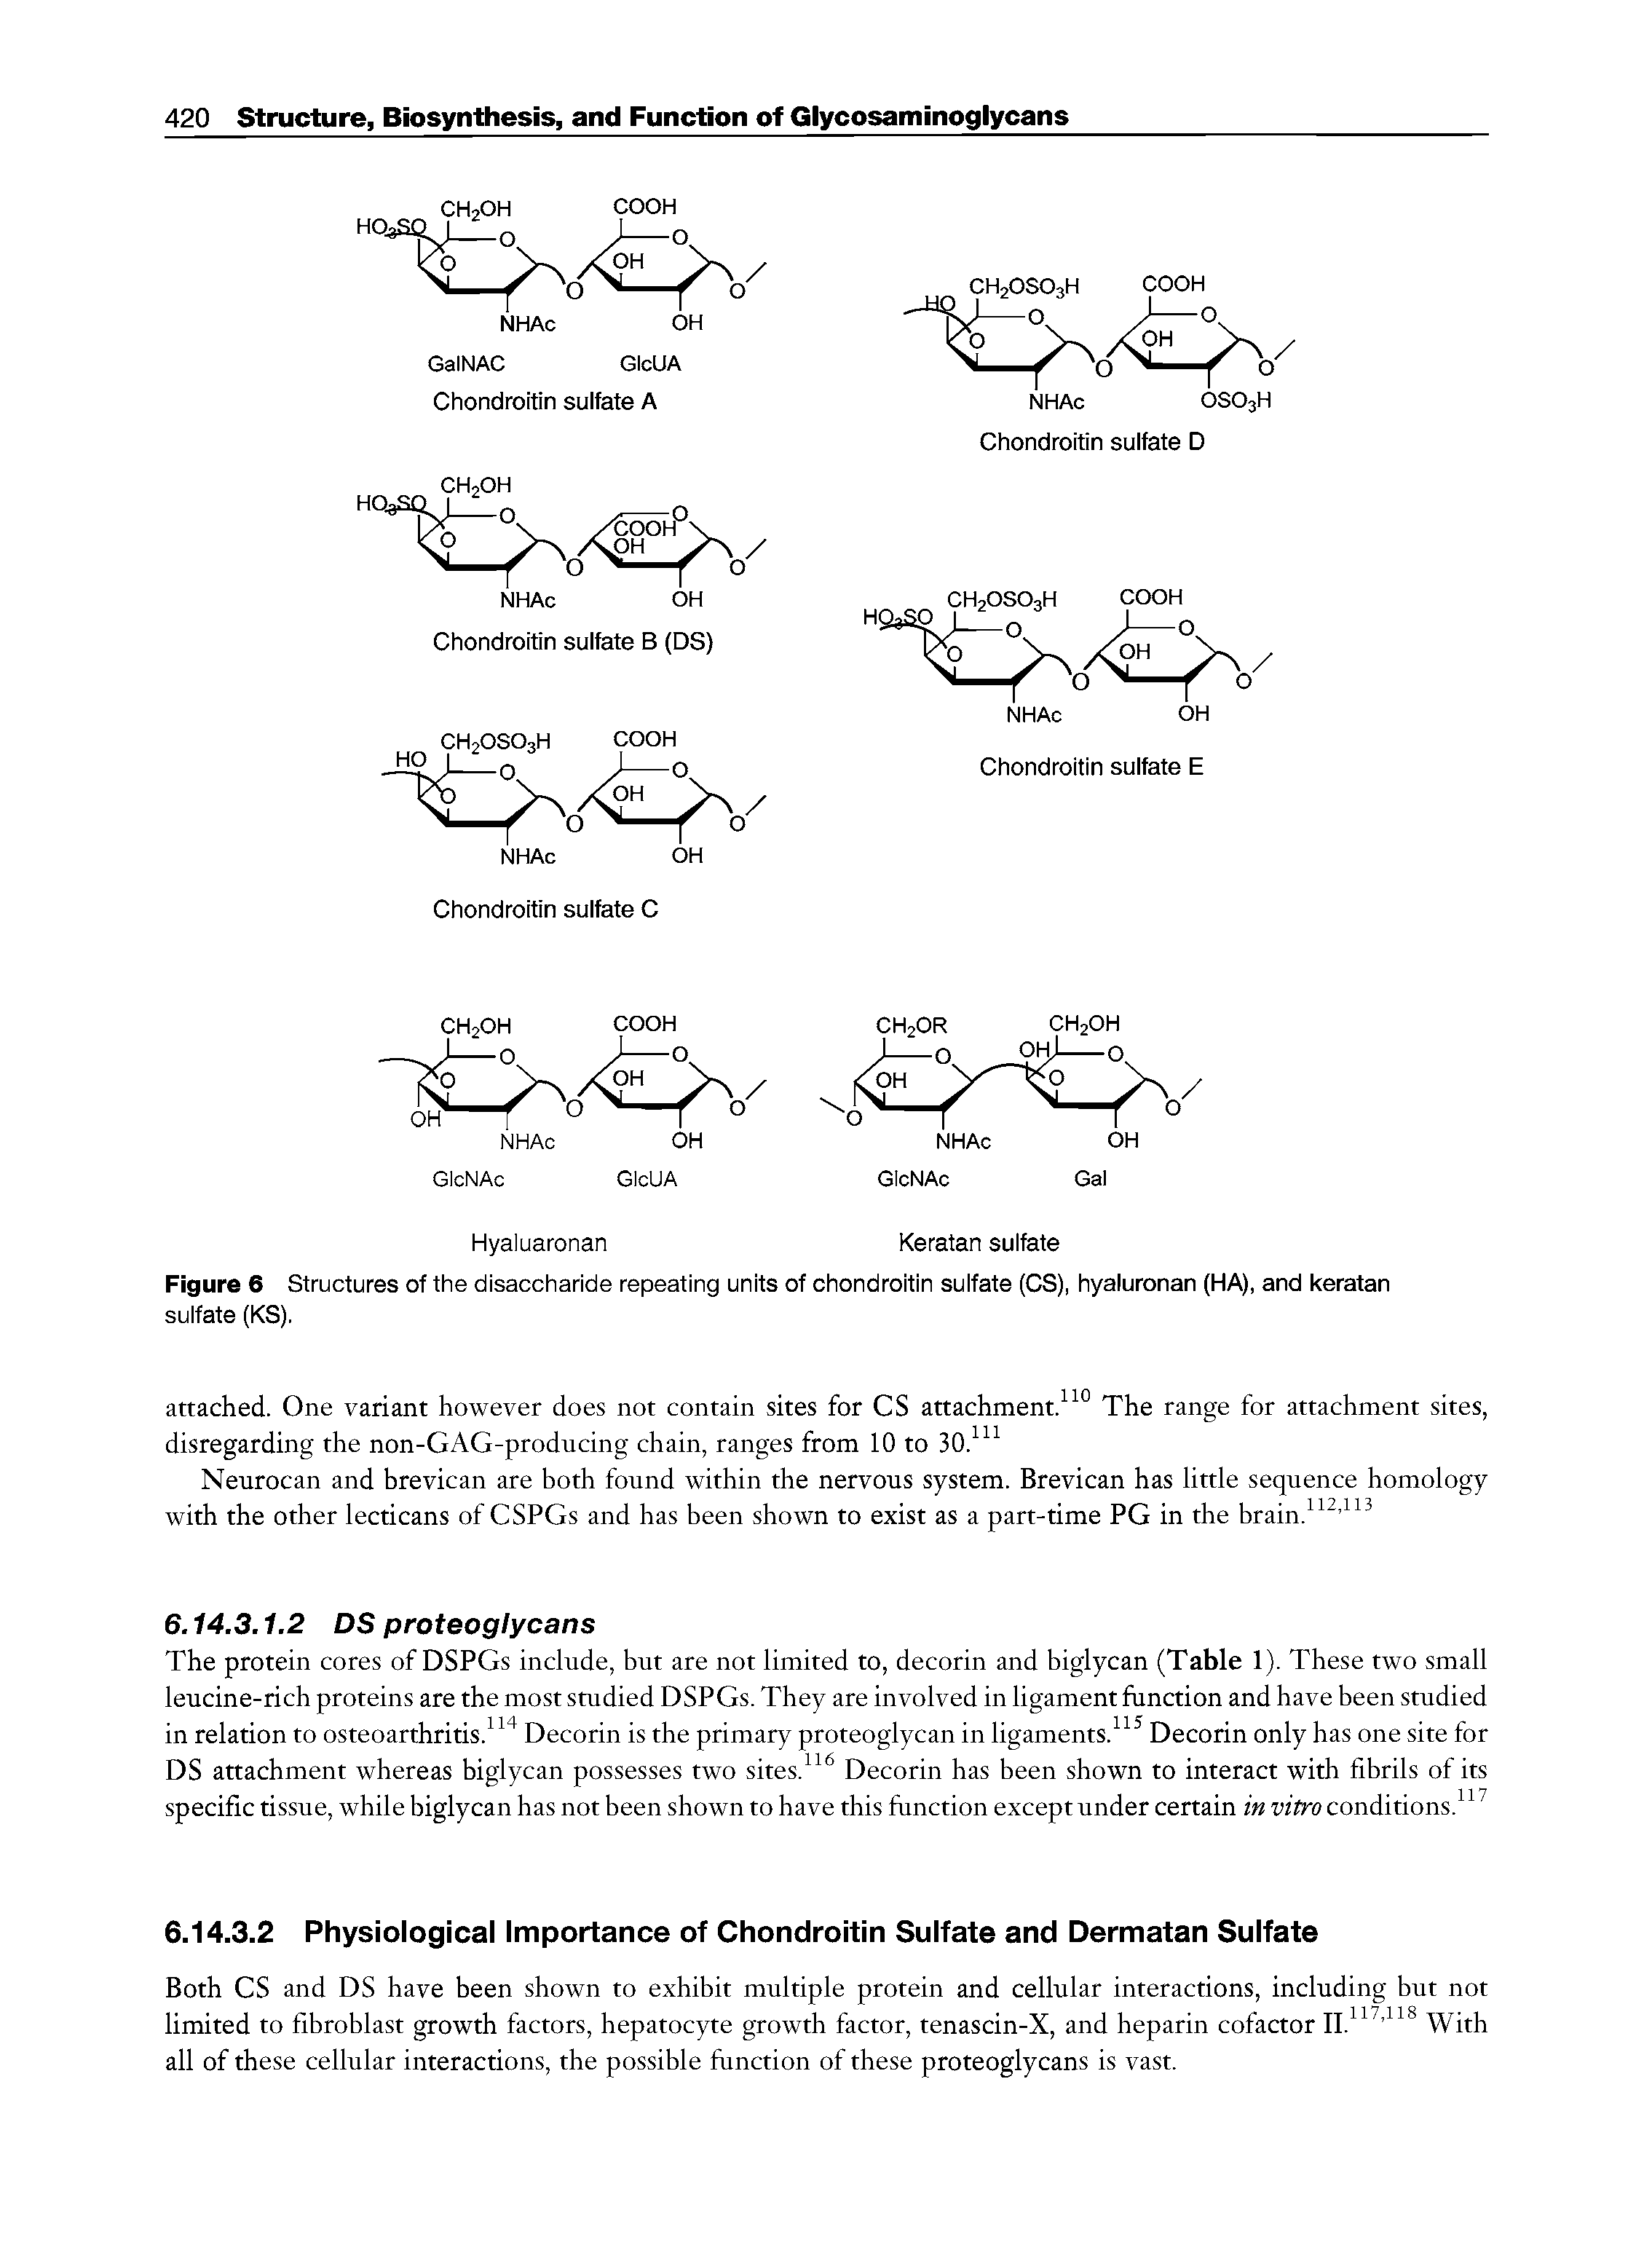 Figure 6 Structures of the disaccharide repeating units of chondroitin sulfate (CS), hyaluronan (HA), and keratan sulfate (KS).